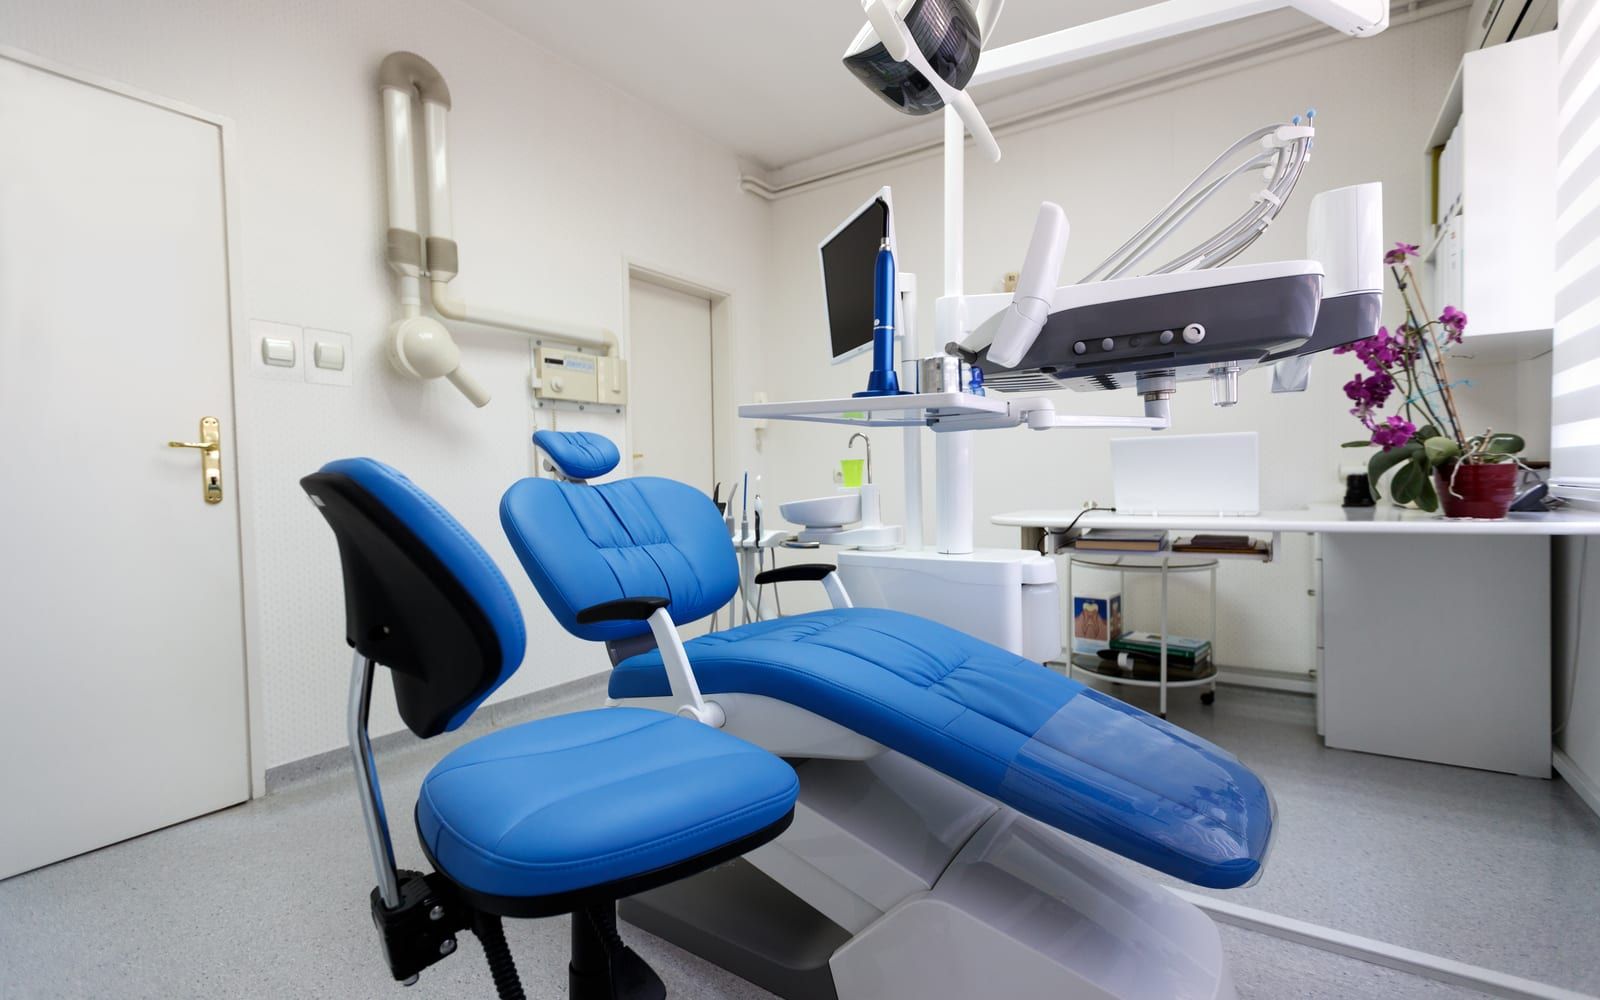 Newly Repaired Dental Chair